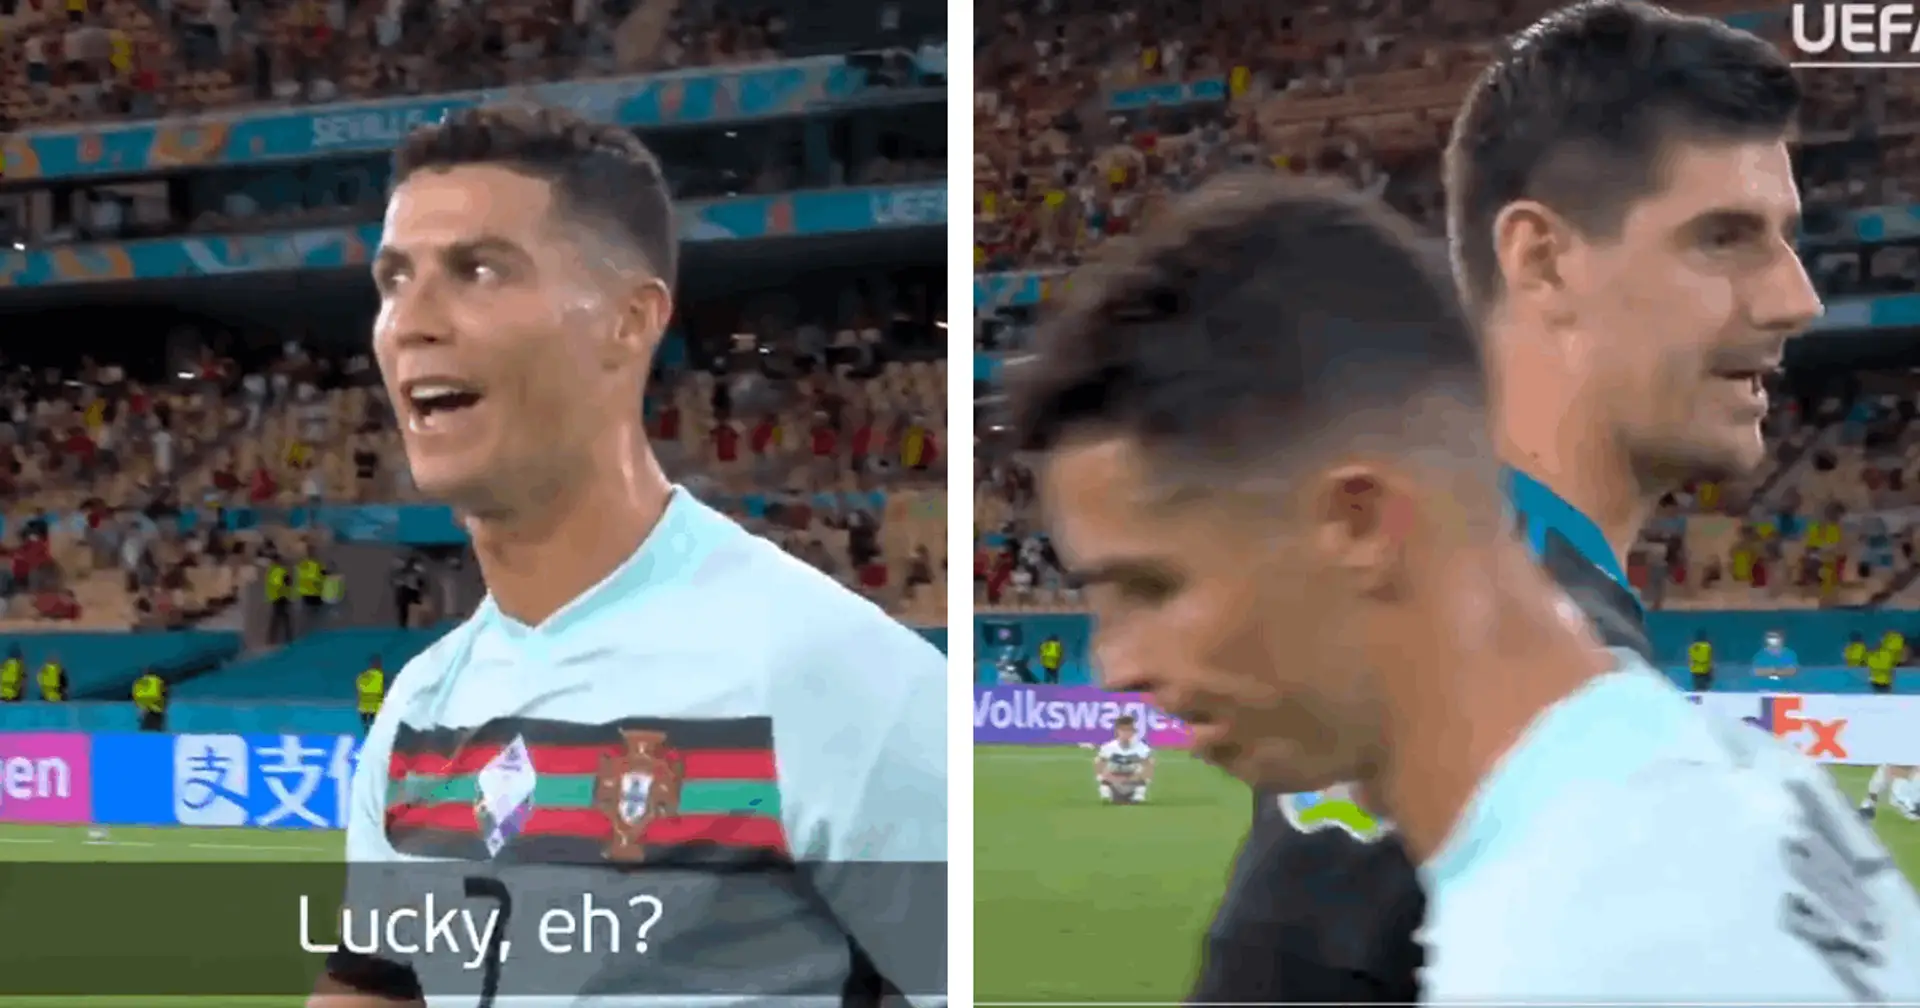 'Lucky eh?': Ronaldo and Courtois chat after Portugal v Belgium caught on camera